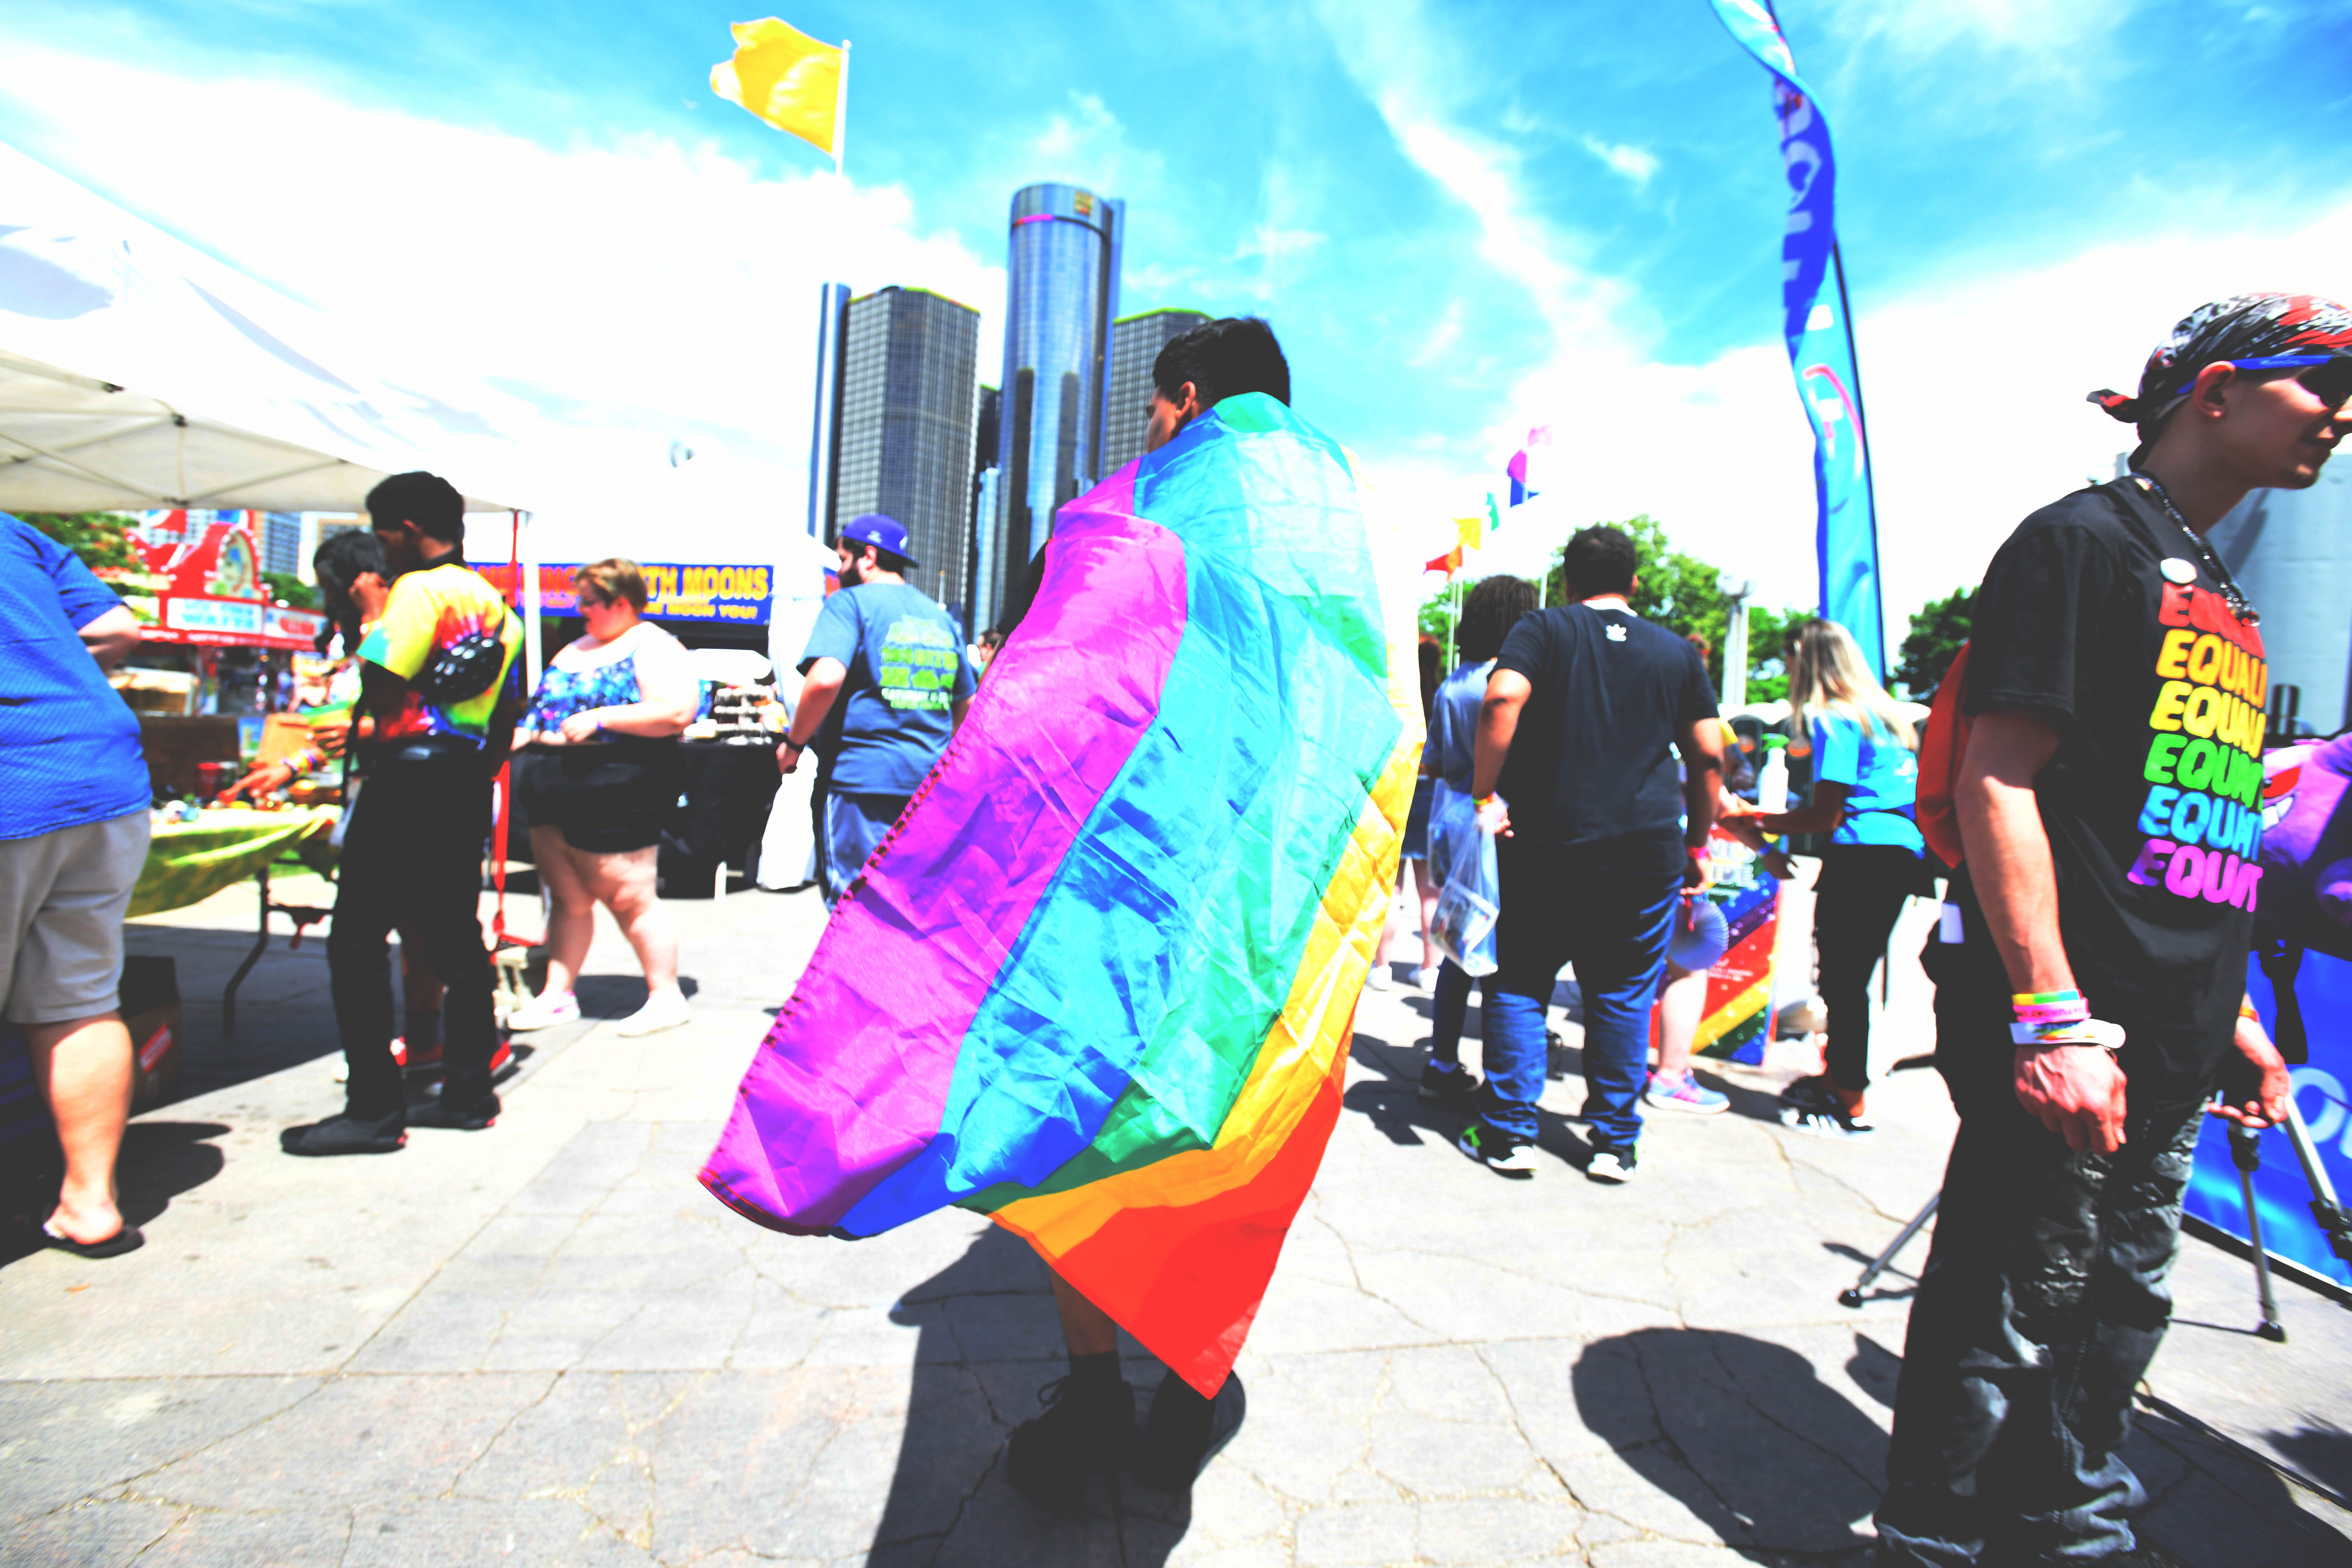 A rainbow caped figure makes his way through the crowd at the Motor City Pride festival in Hart Plaza in Detroit.